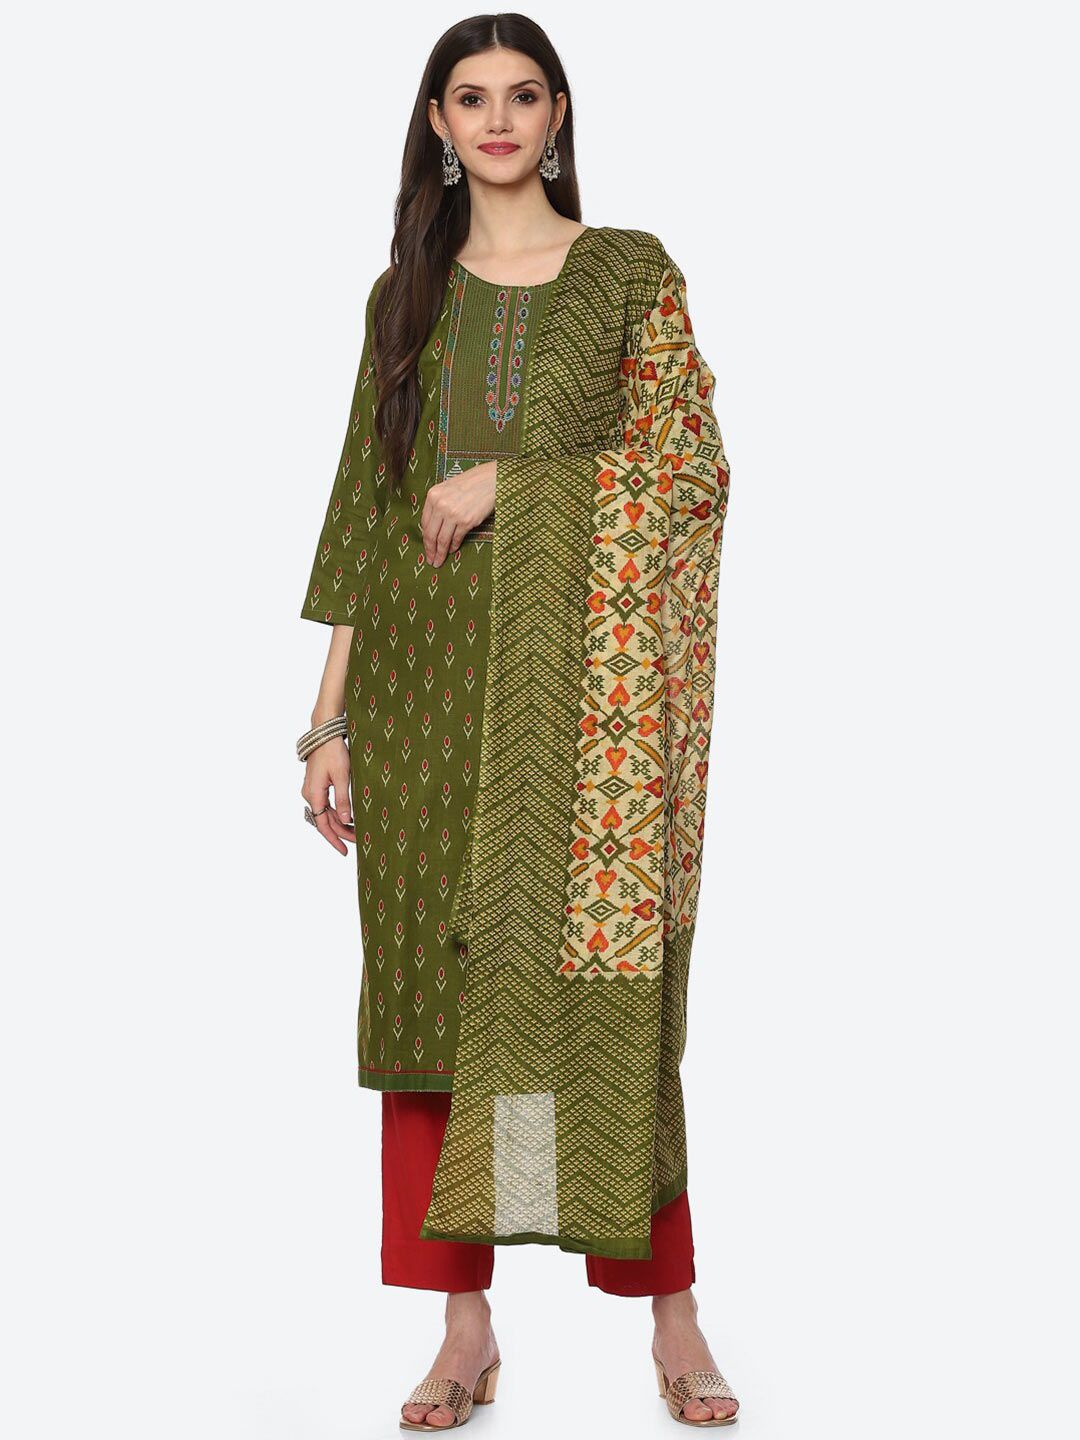 Biba Green & Red Printed Unstitched Dress Material Price in India